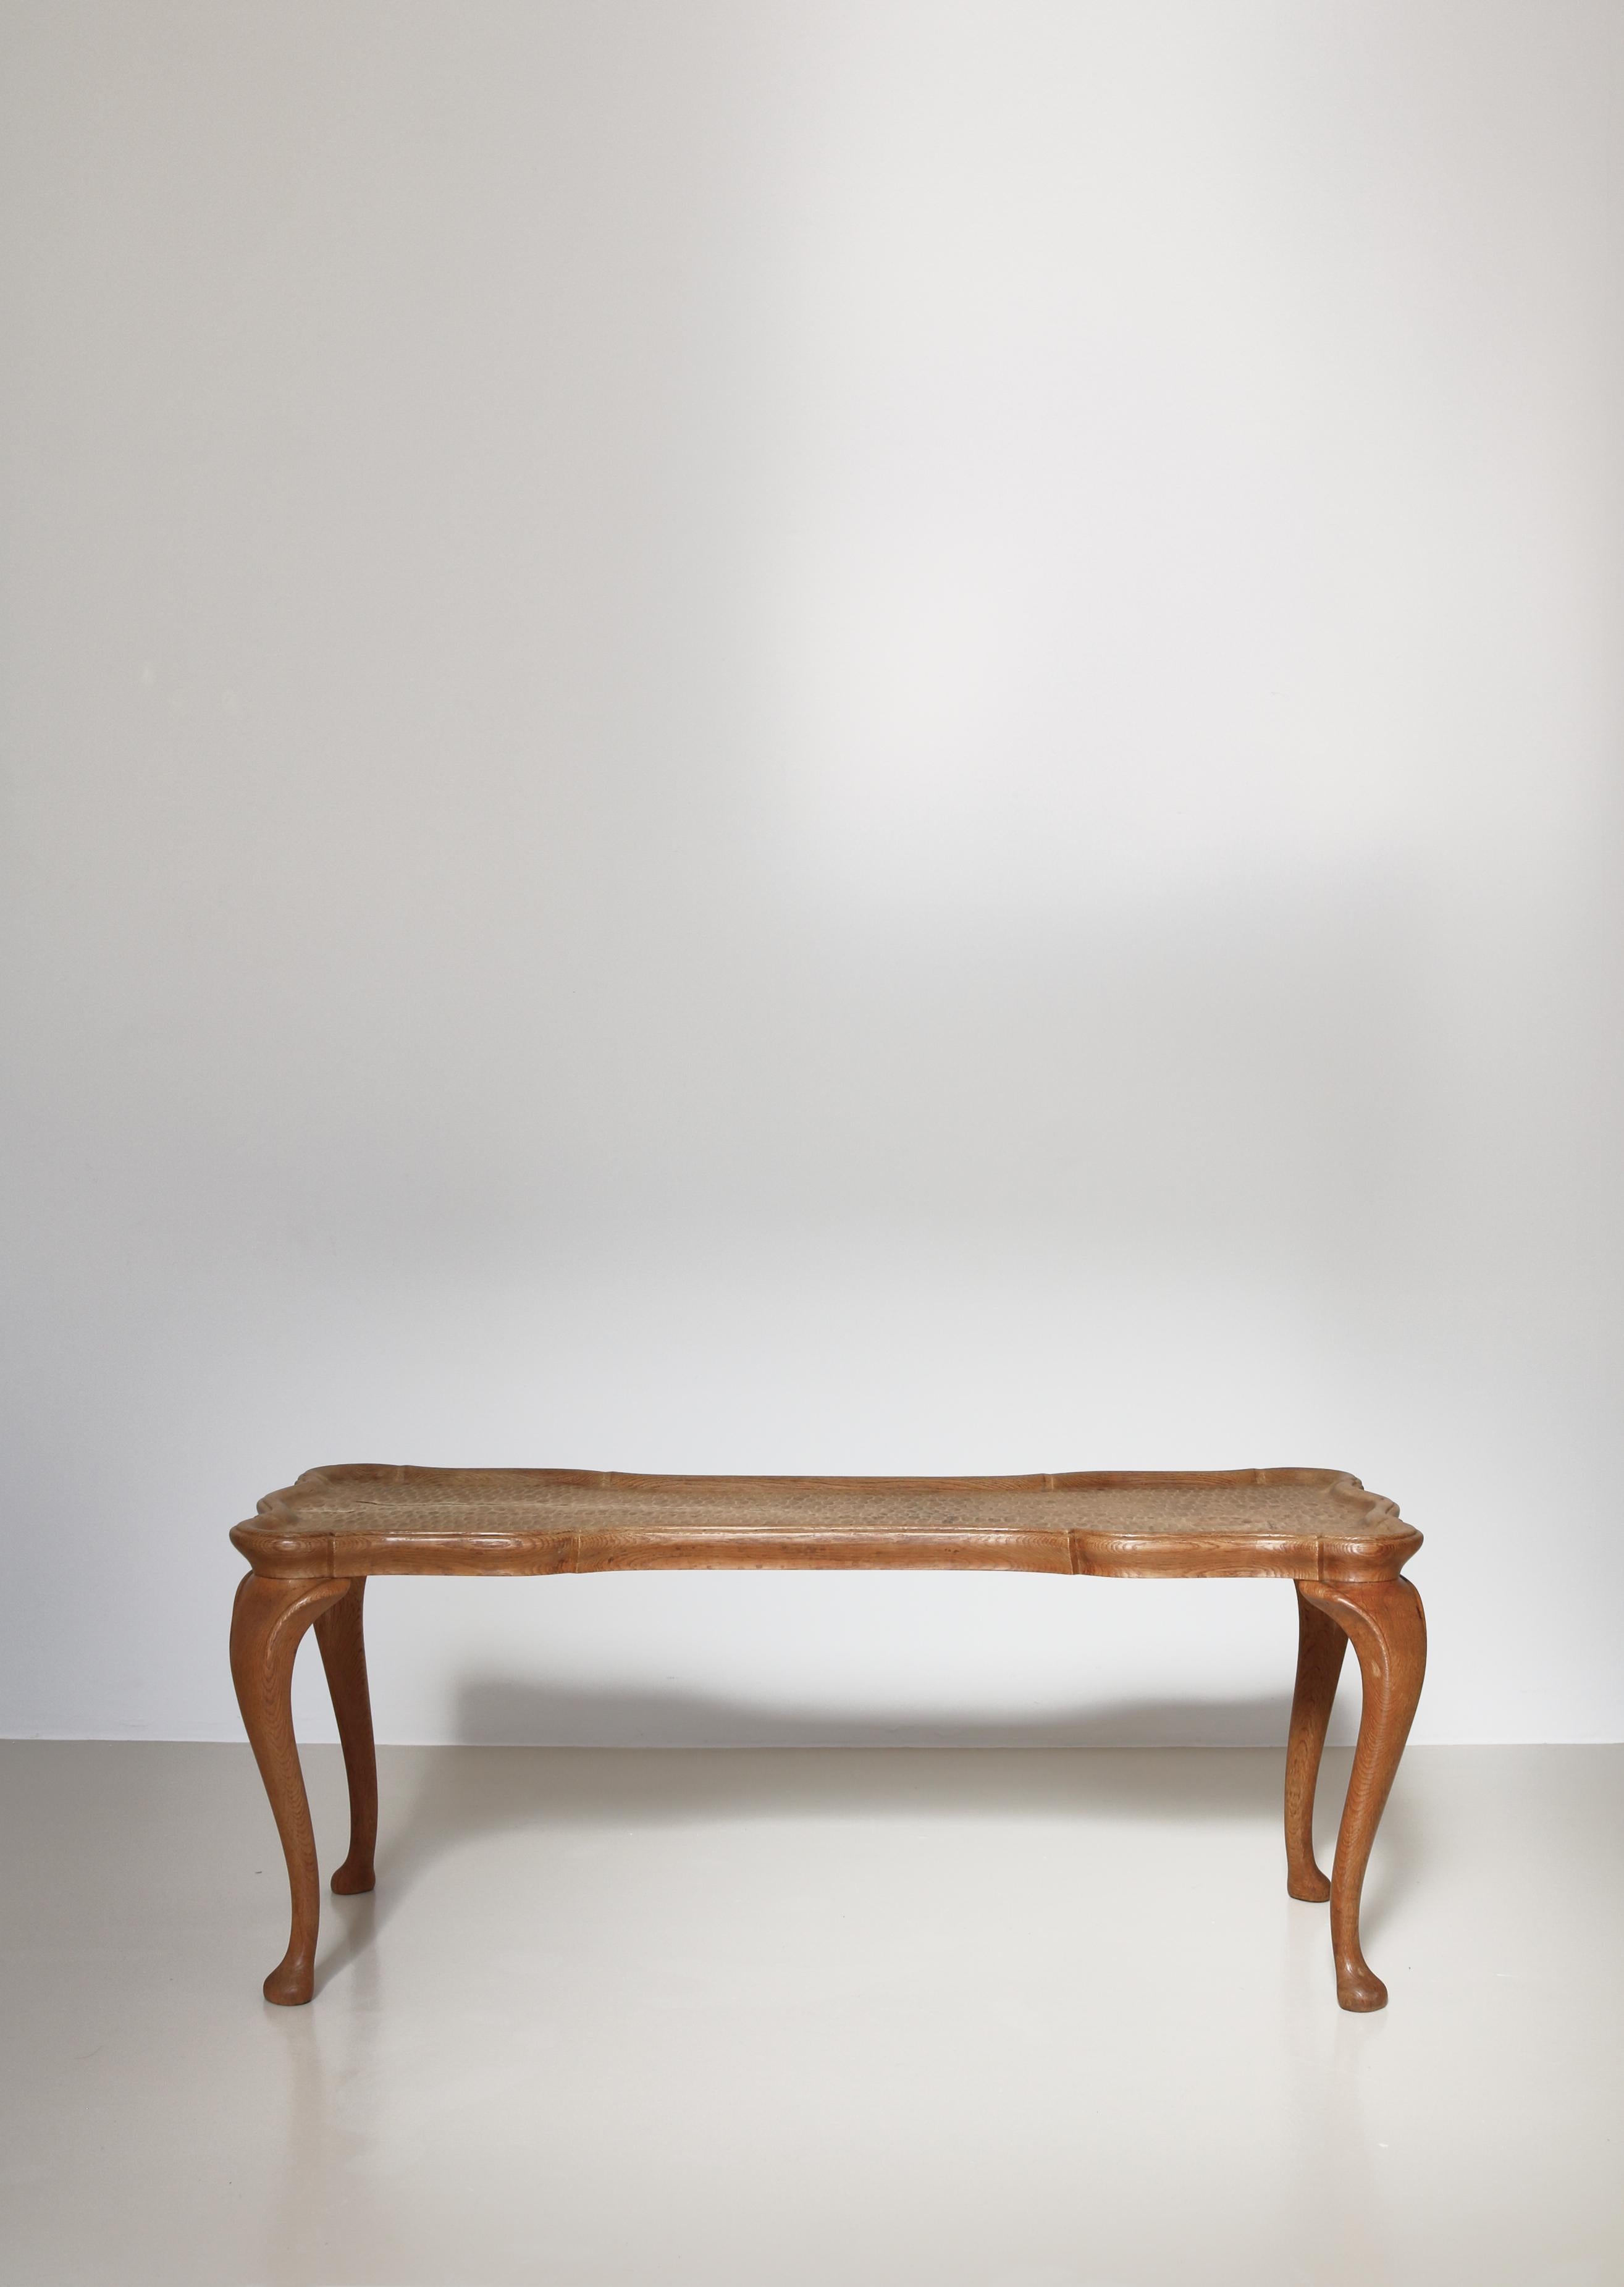 Scandinavian Modern Frits Henningsen Carved Coffee Table with Gouged Top Solid Oak, Denmark, 1940s For Sale